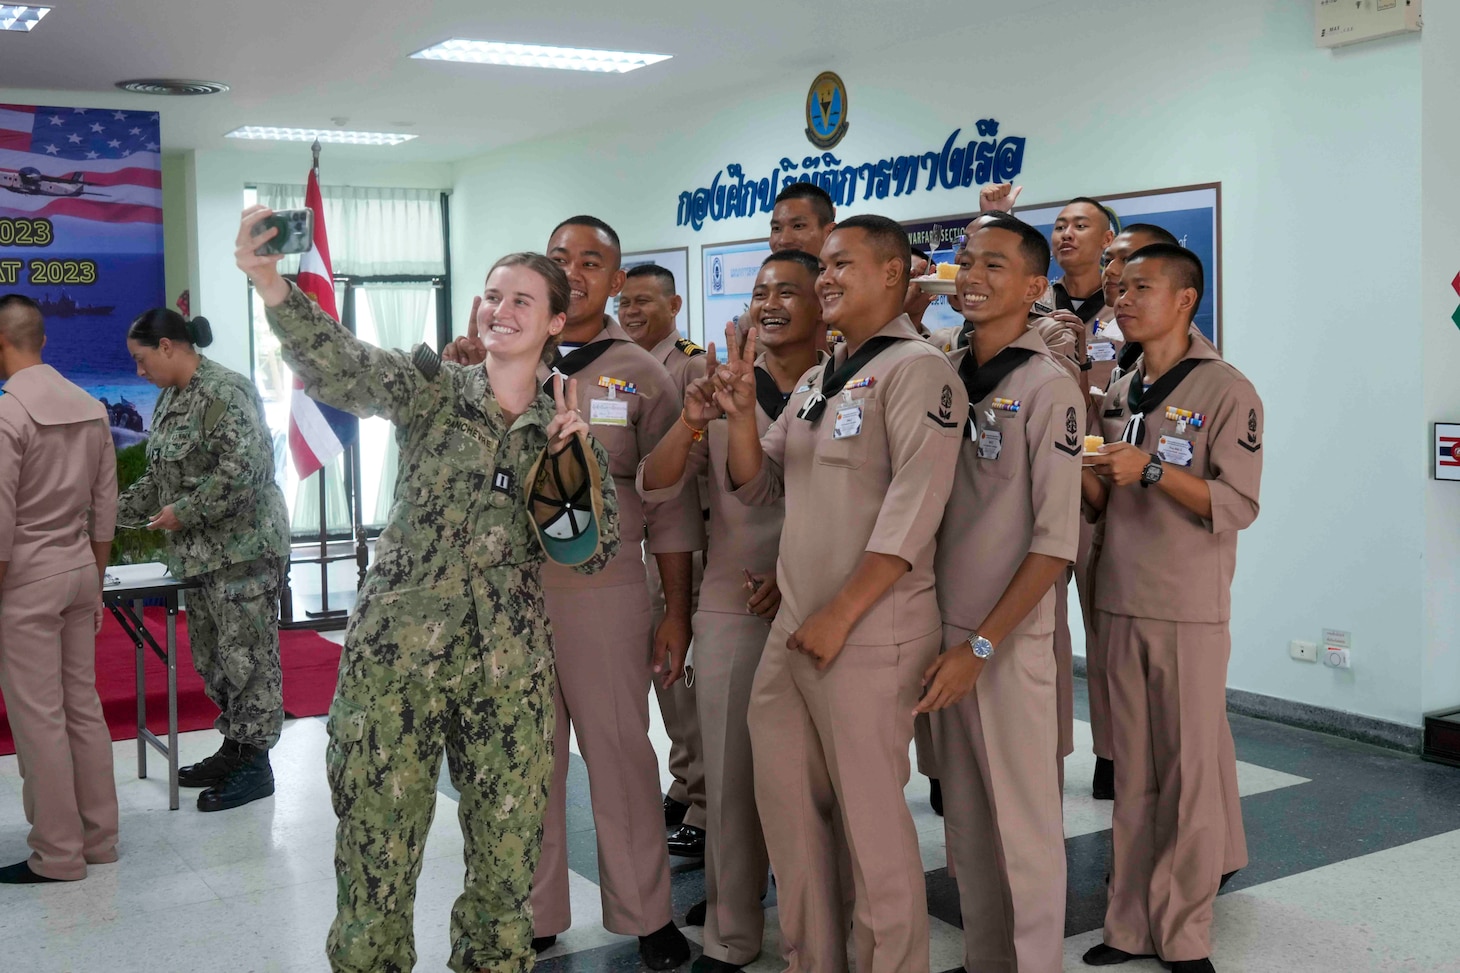 U.S. Navy Lt. Gabrielle Panchevre takes a photo with Royal Thai Navy Sailors during the closing ceremony of Cooperation Afloat Readiness and Training (CARAT)/Marine Exercise (MAREX) Thailand 2023 at Royal Thai Fleet Headquarters, May 15. CARAT/MAREX Thailand is a bilateral exercise between the Kingdom of Thailand and United States to promote regional security cooperation, practice humanitarian assistance and disaster relief, and strengthen maritime understanding, partnerships and interoperability. Thailand has been part of the CARAT exercise series since 1995. In its 29th year, the CARAT series is comprised of multinational exercises, designed to enhance U.S. and partner forces’ abilities to operate together in response to traditional and non-traditional maritime security challenges in the Indo-Pacific region.